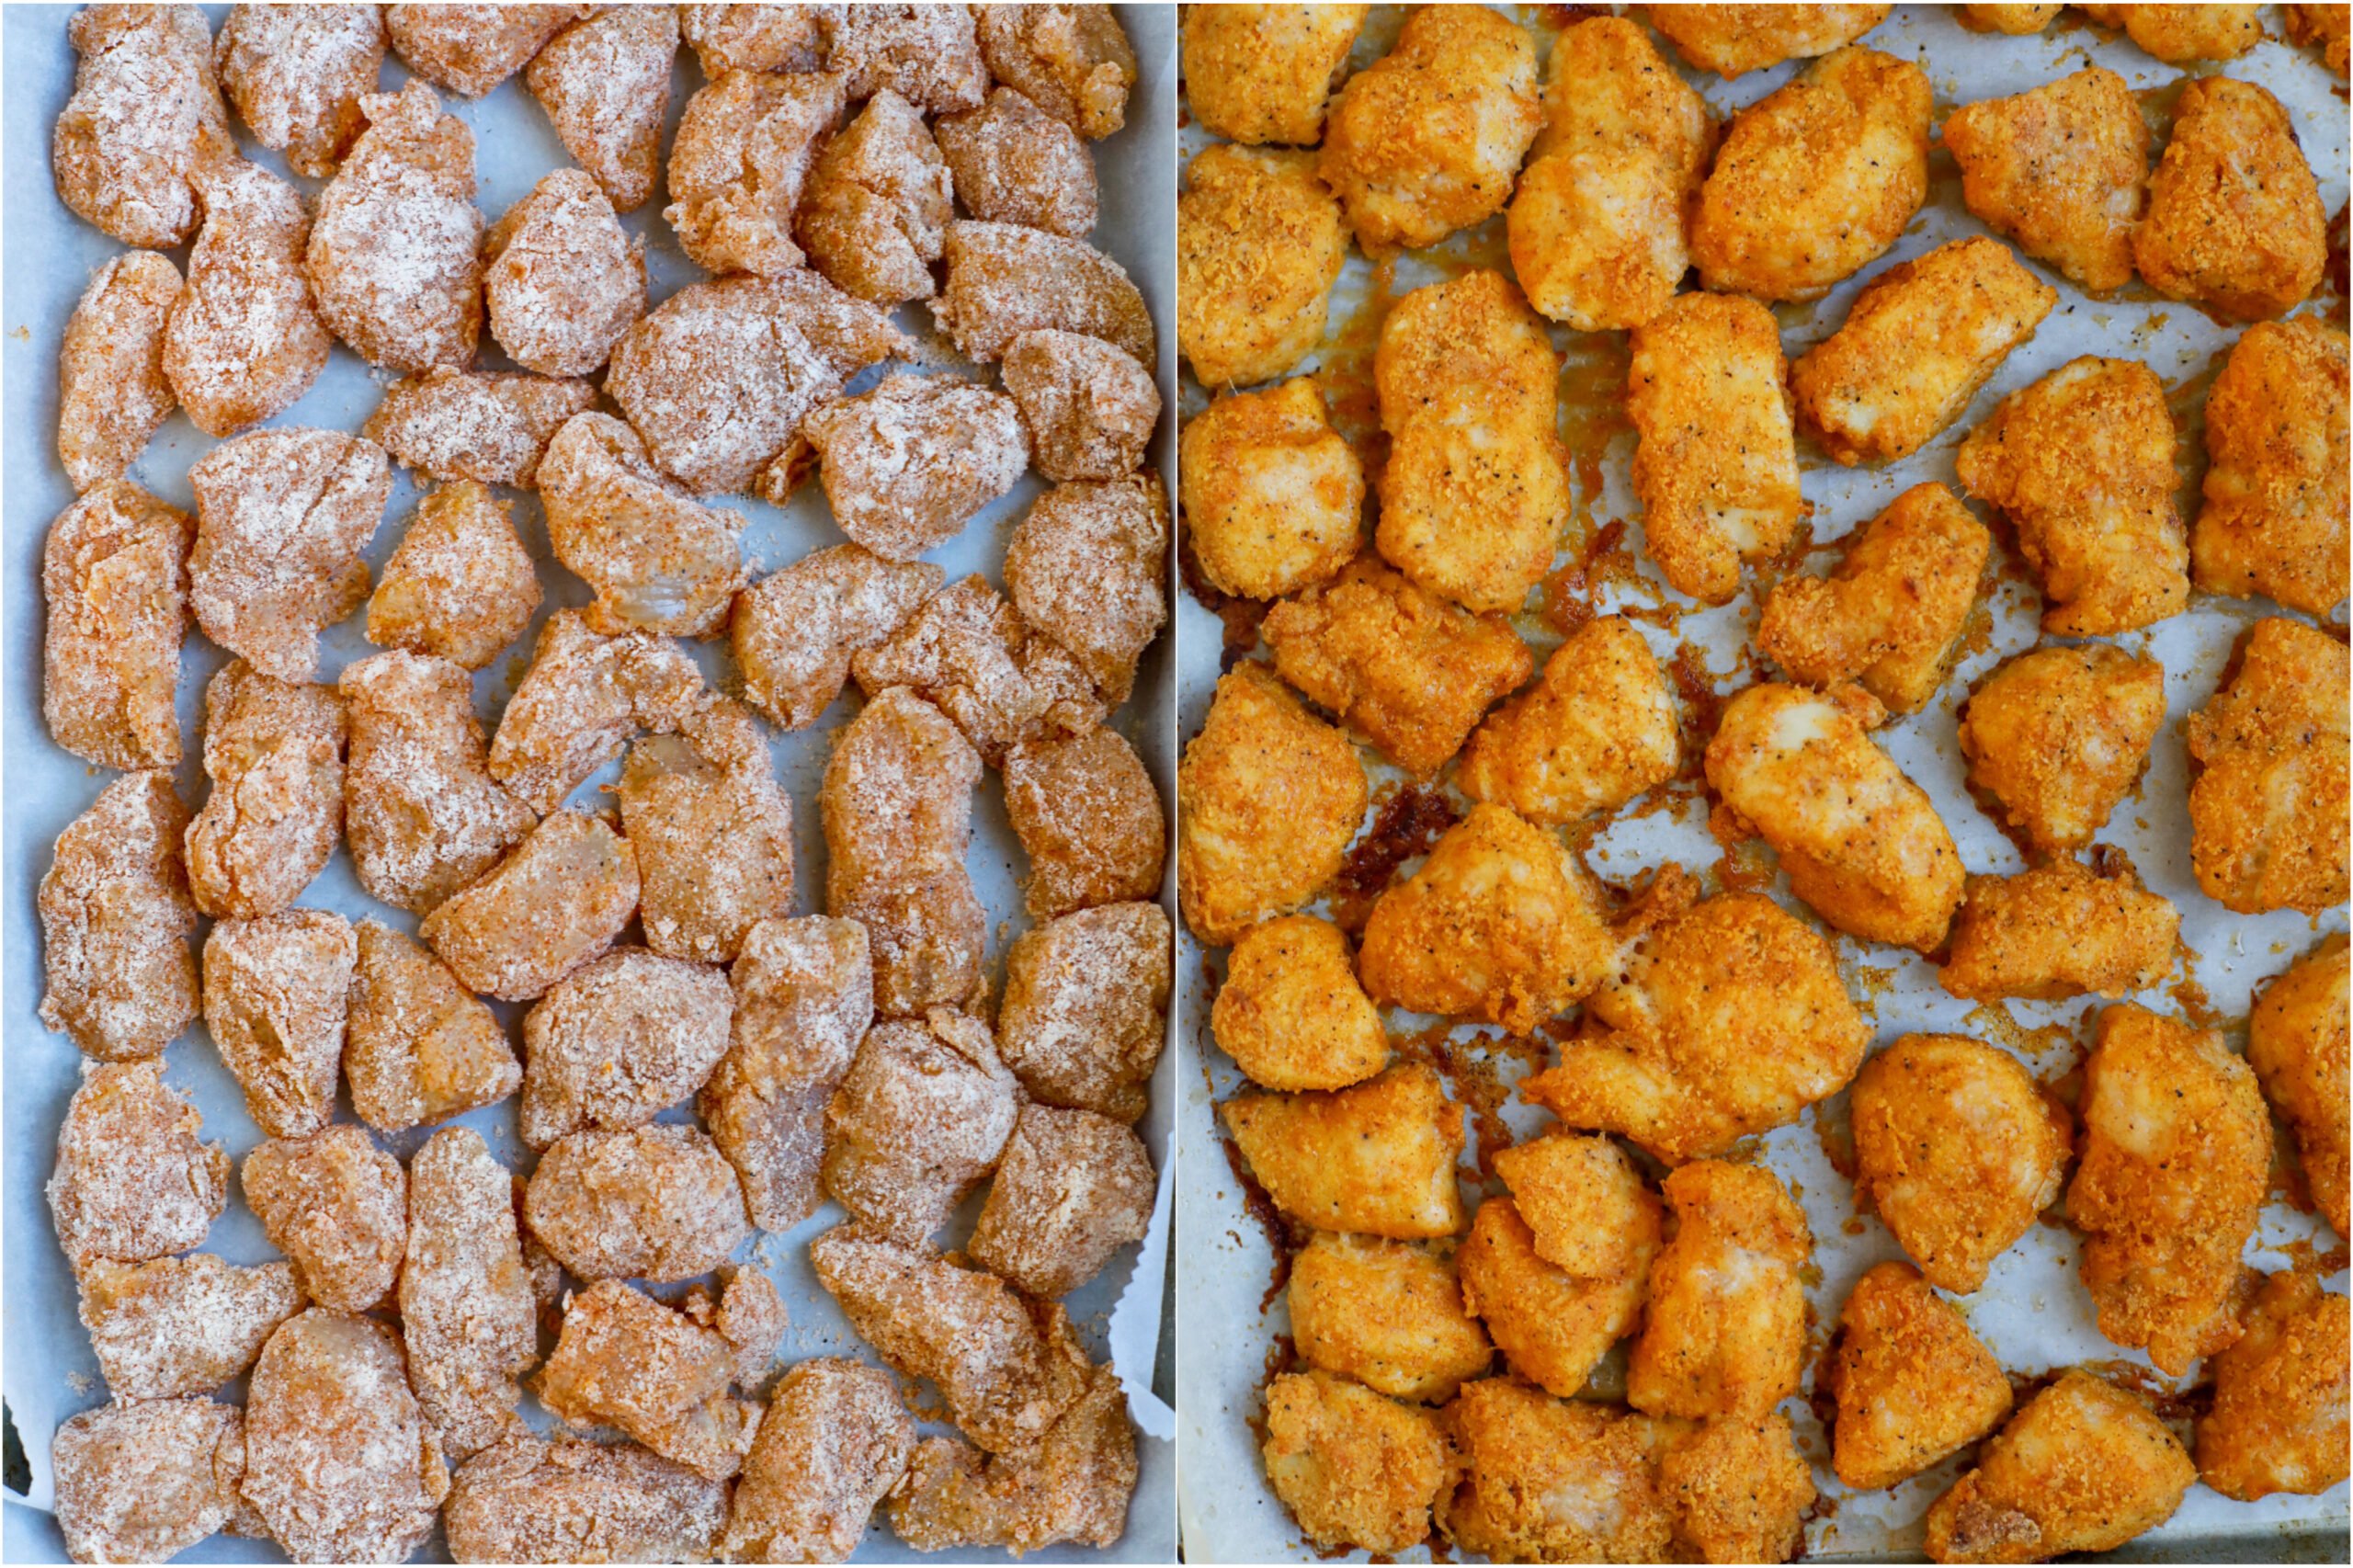 Crispy chicken pieces in a sheet pan before and after baking.